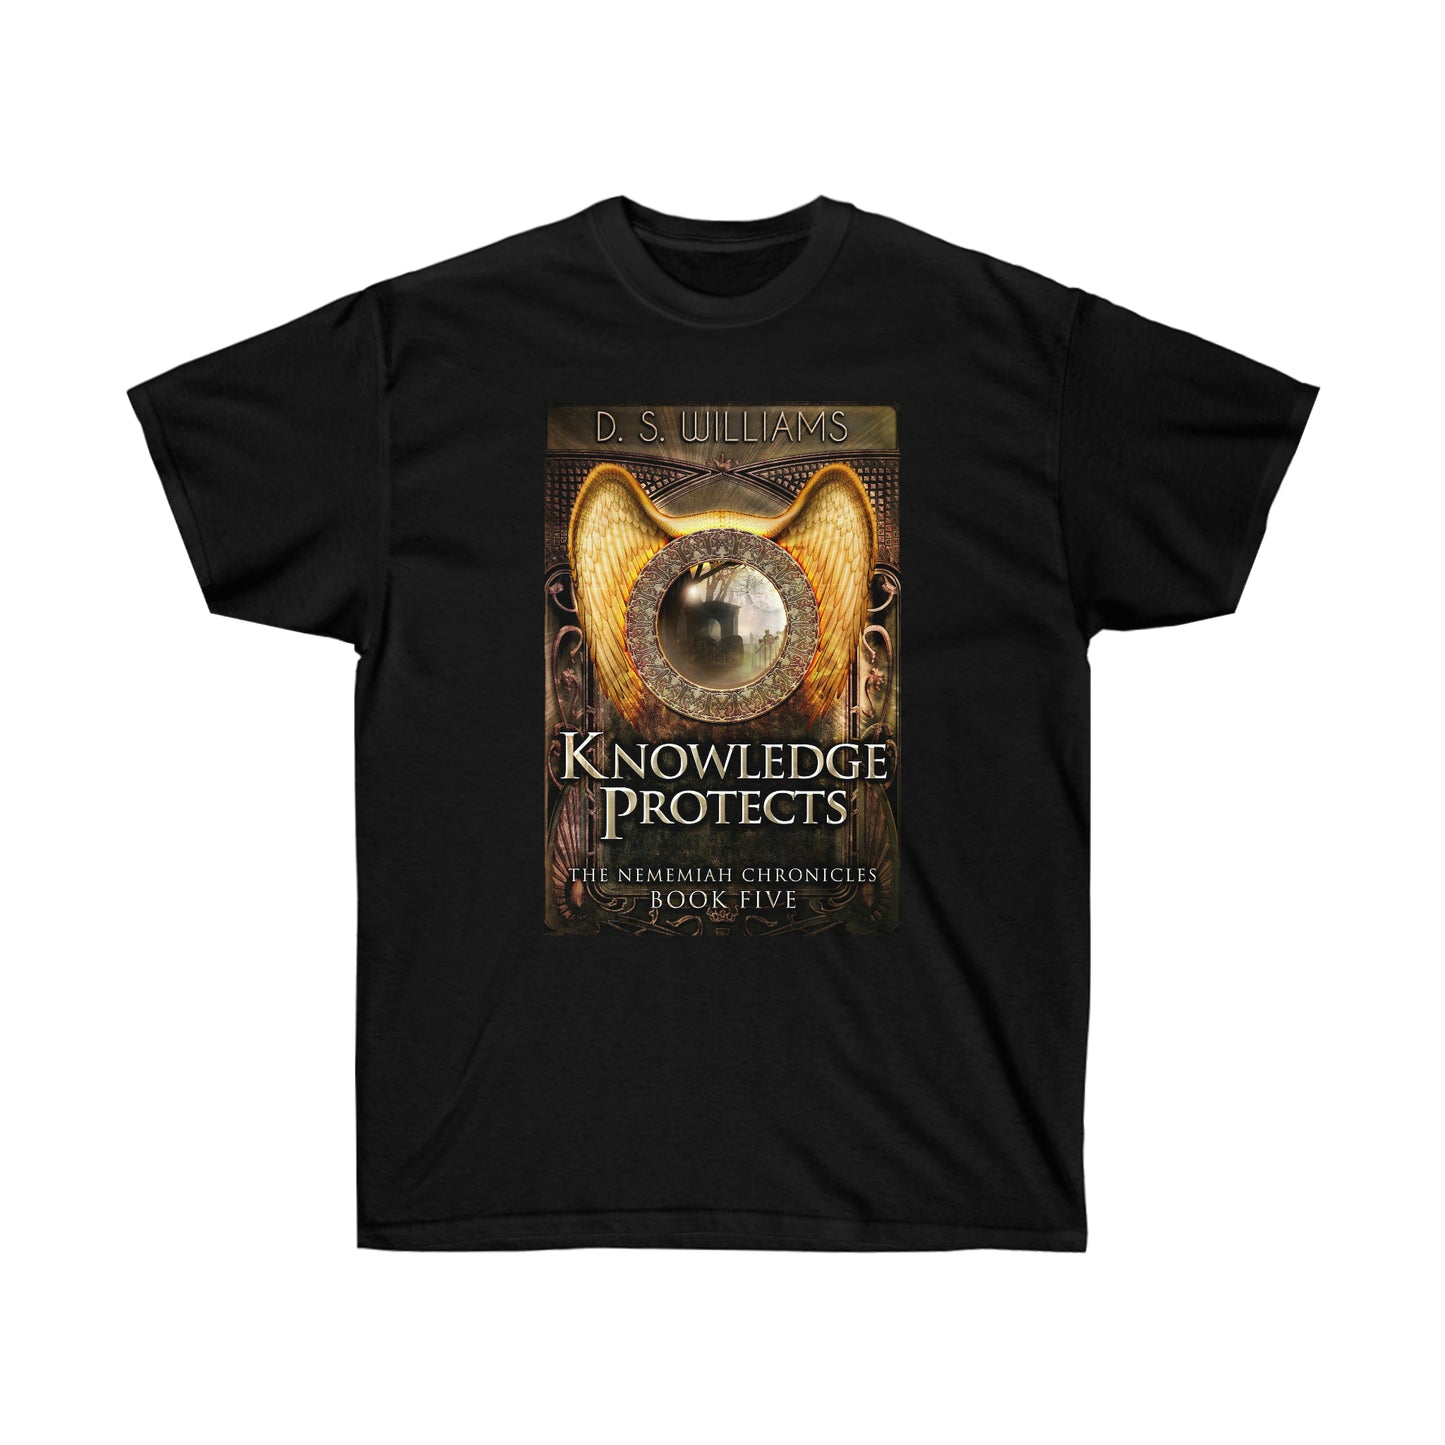 Knowledge Protects - Unisex T-Shirt